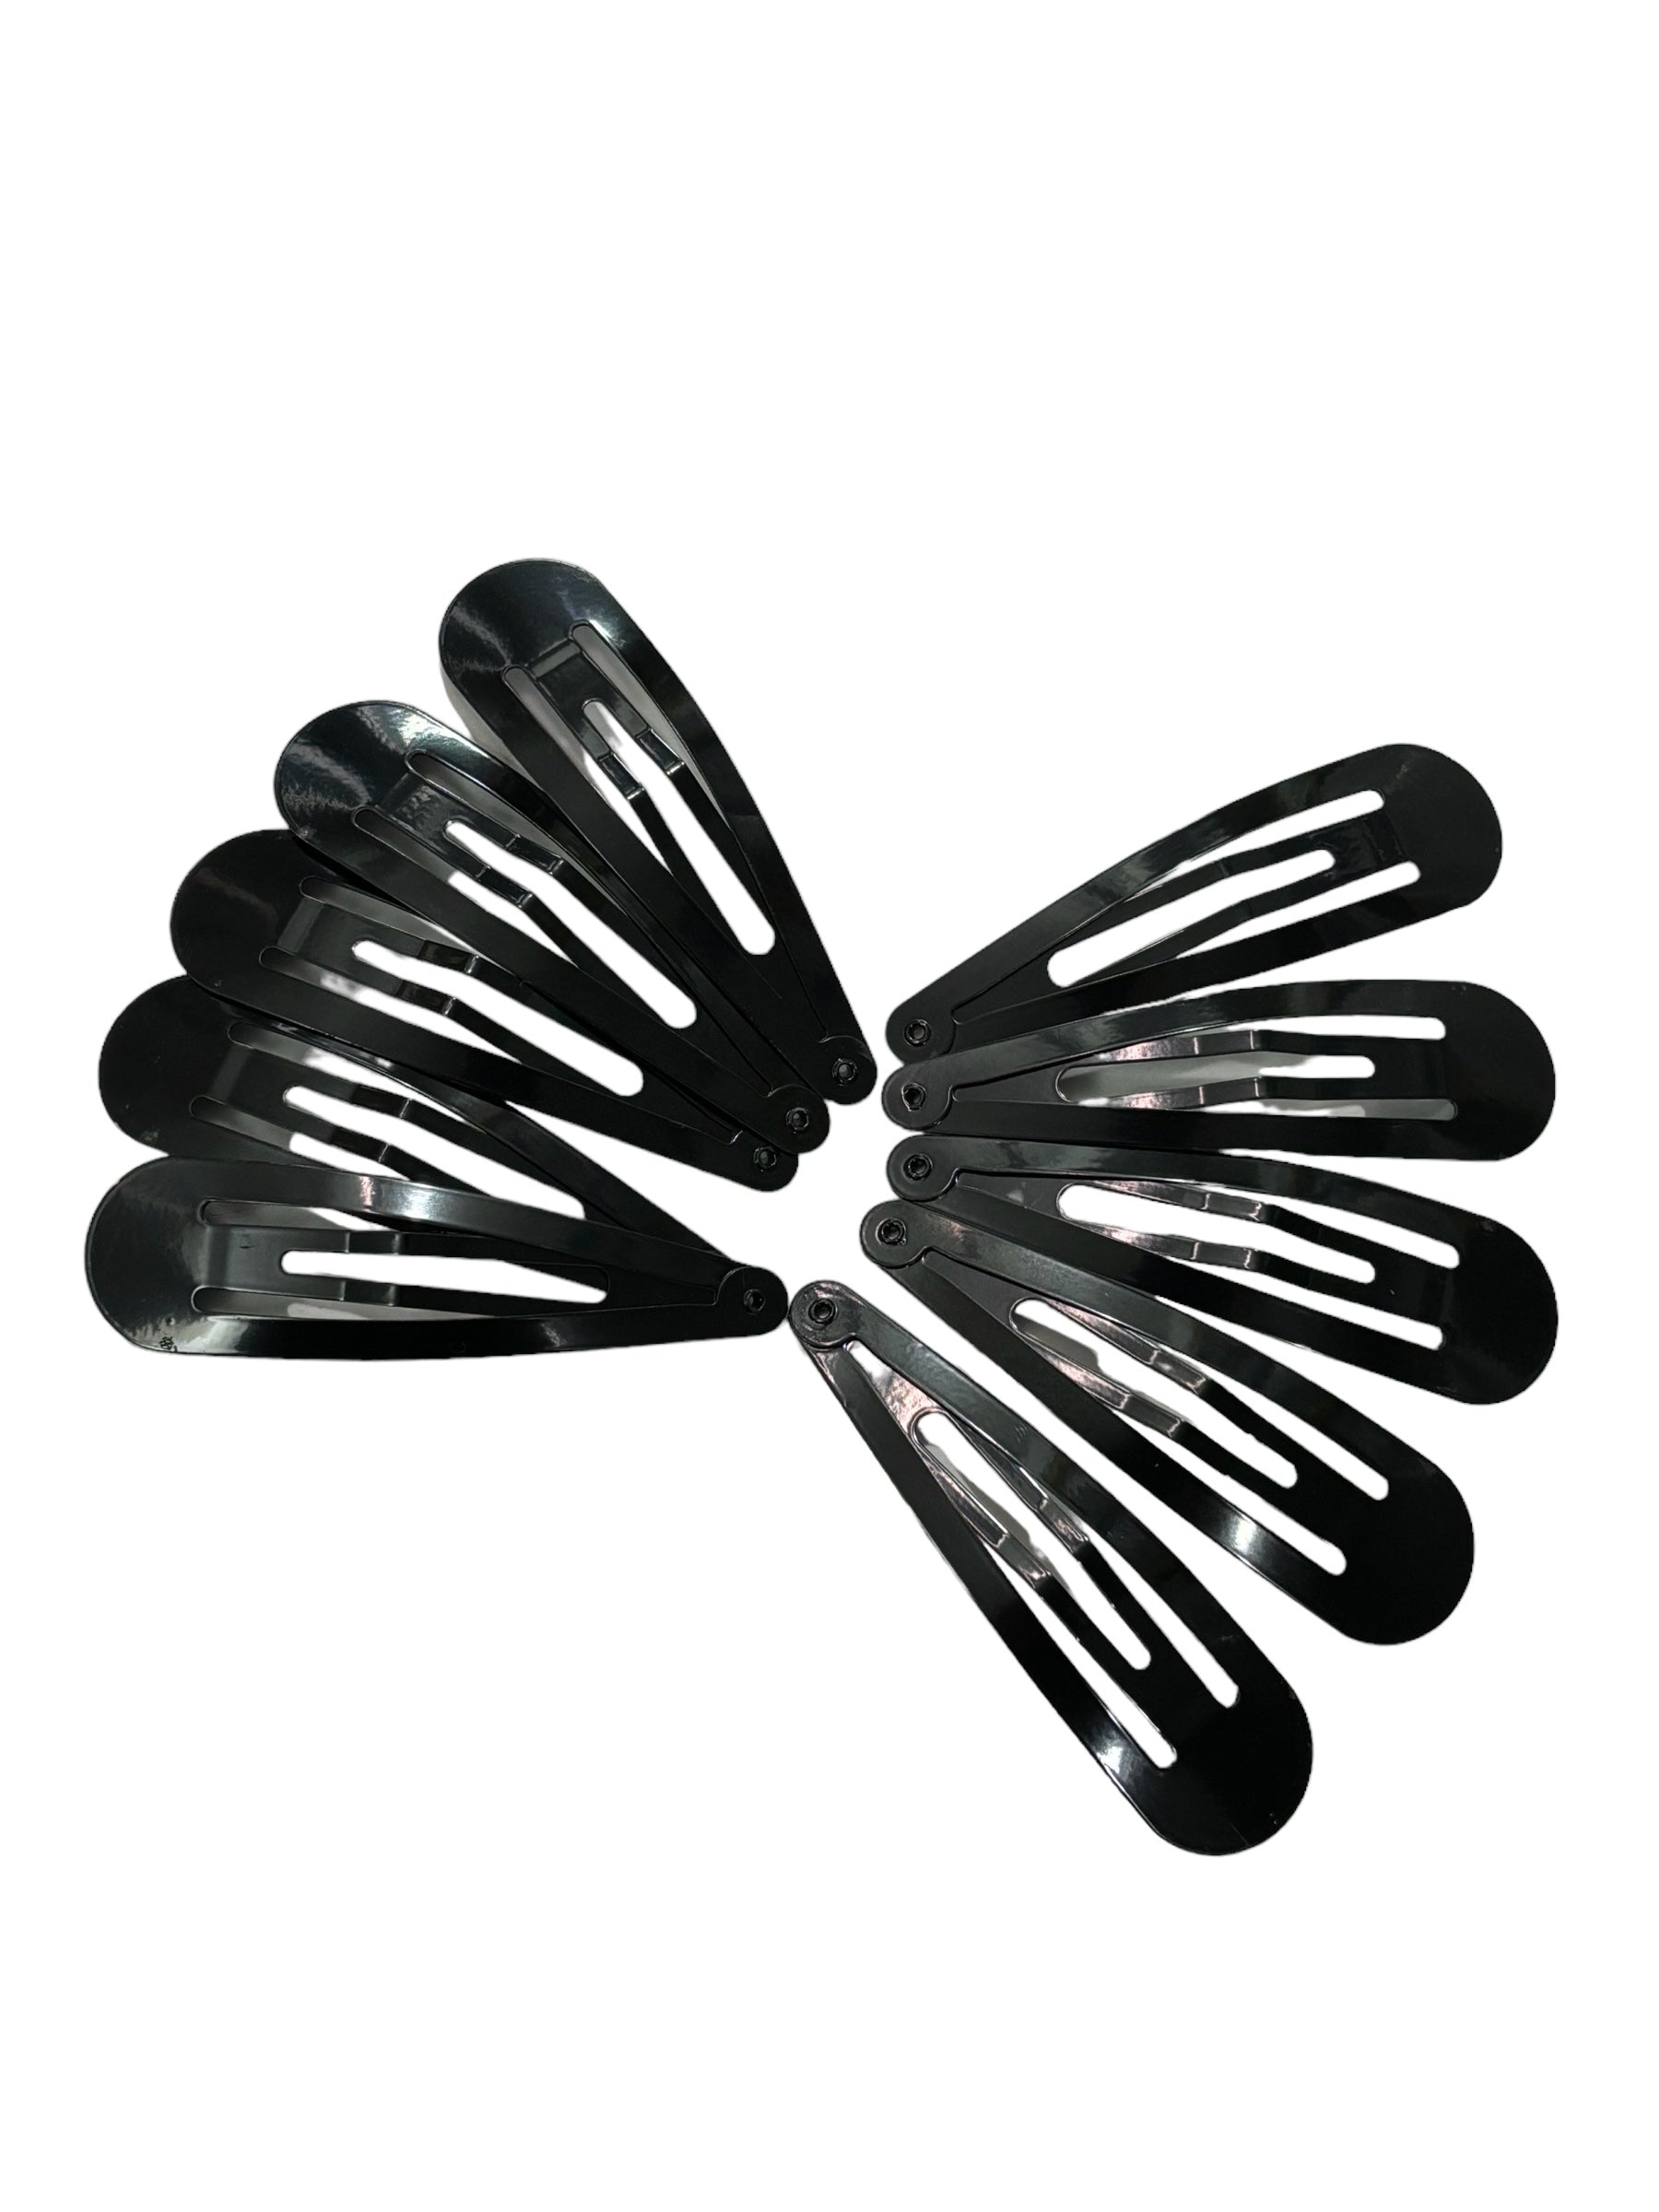 Simply Metal Snap Clips 10pc -A104